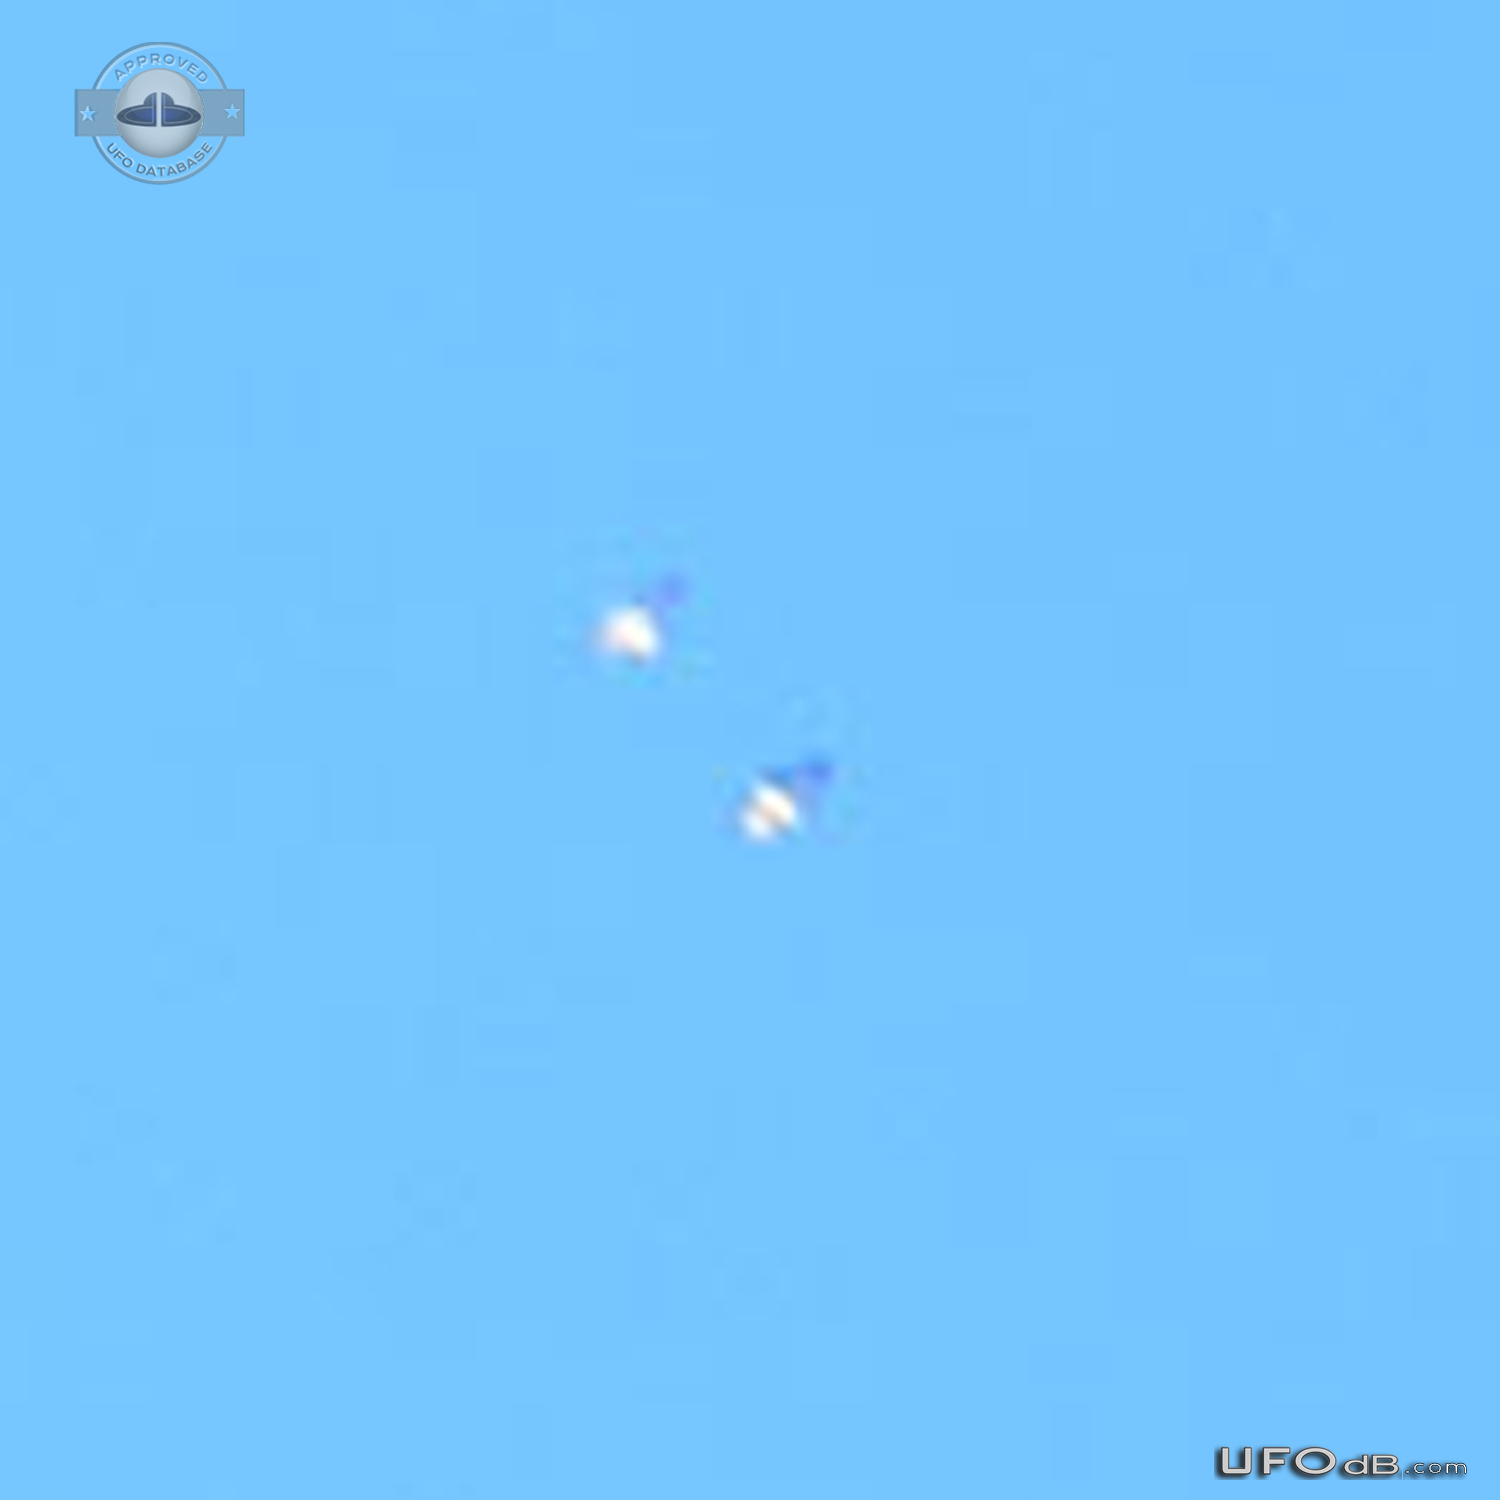 I was Capturing Flying Boeing Jet Images From My Cam Sri Lanka 2015 UFO Picture #727-4